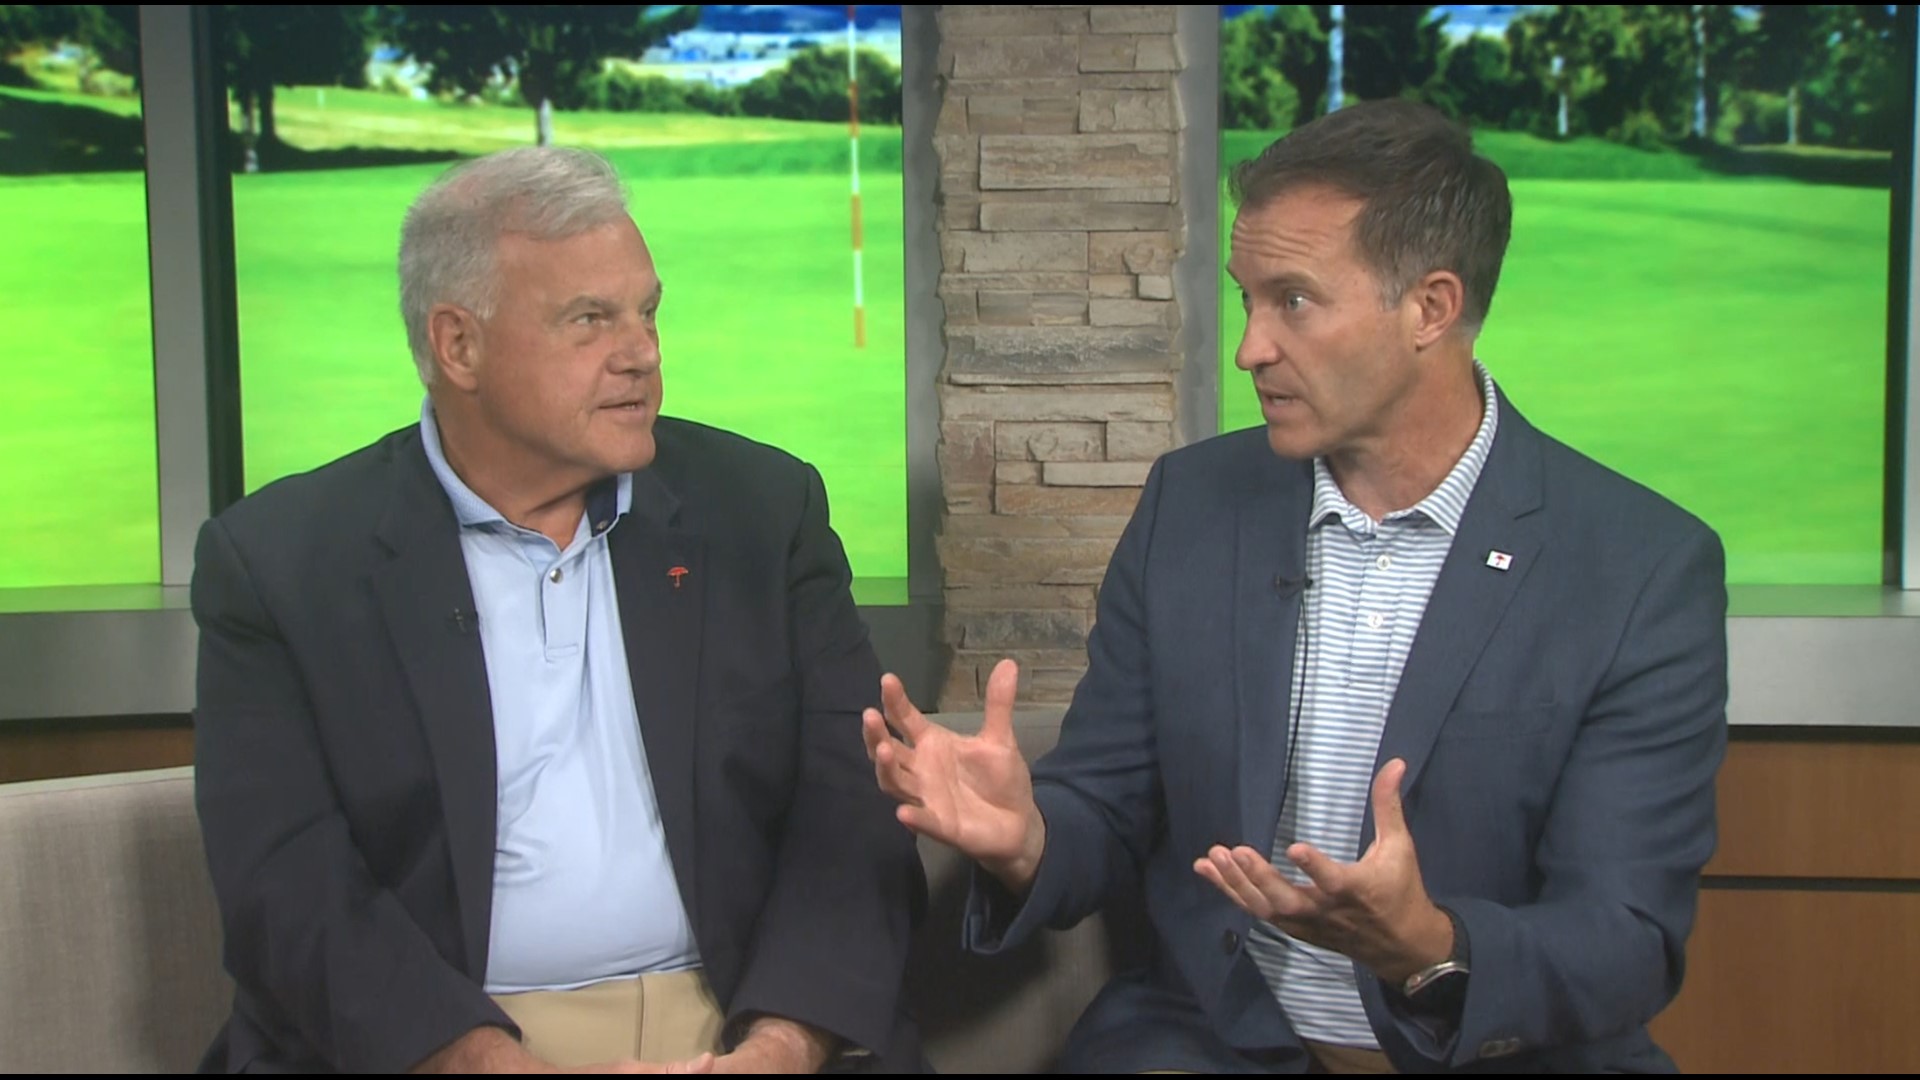 Tournament Director Nathan Grube and Travelers
EVP and Chief Administrative Officer Andy Bessette spoke to Jonah Karp about Rory McIlroy's course criticisms.